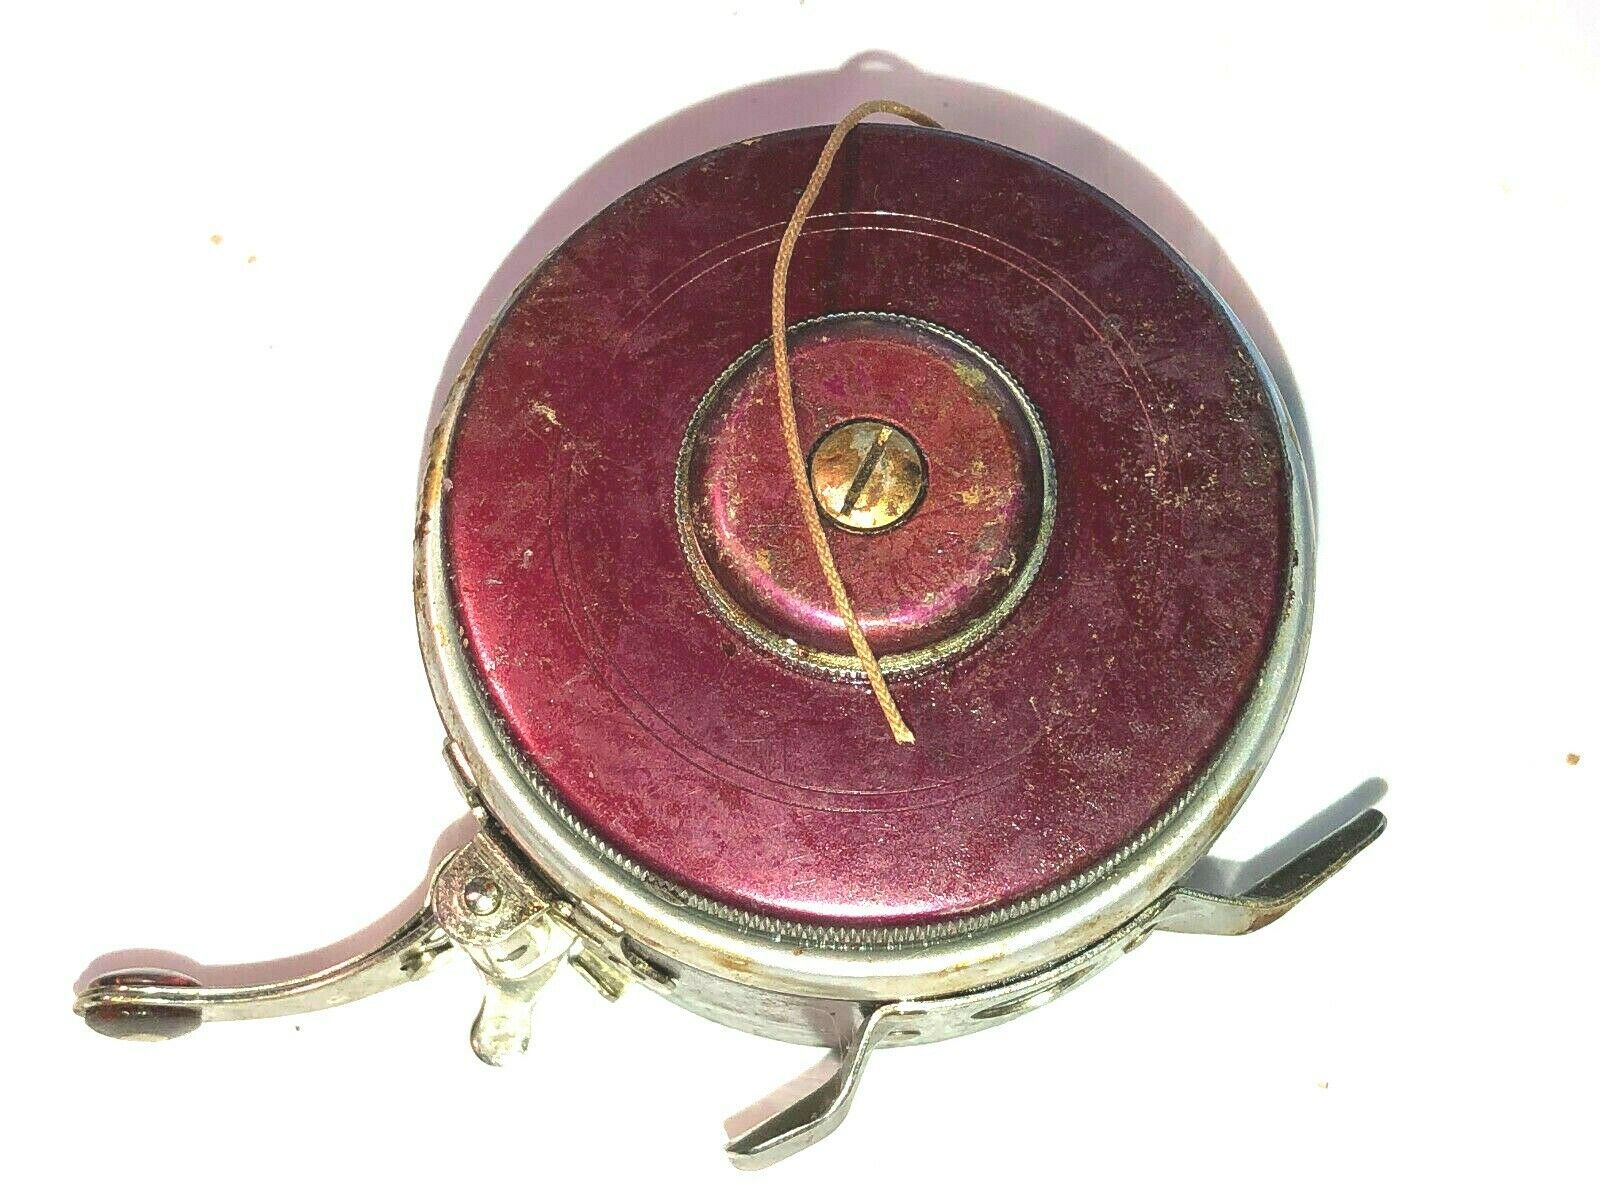 Primary image for Vintage Oren-o-matic Fishing Reel No 1140 Model D South Bend